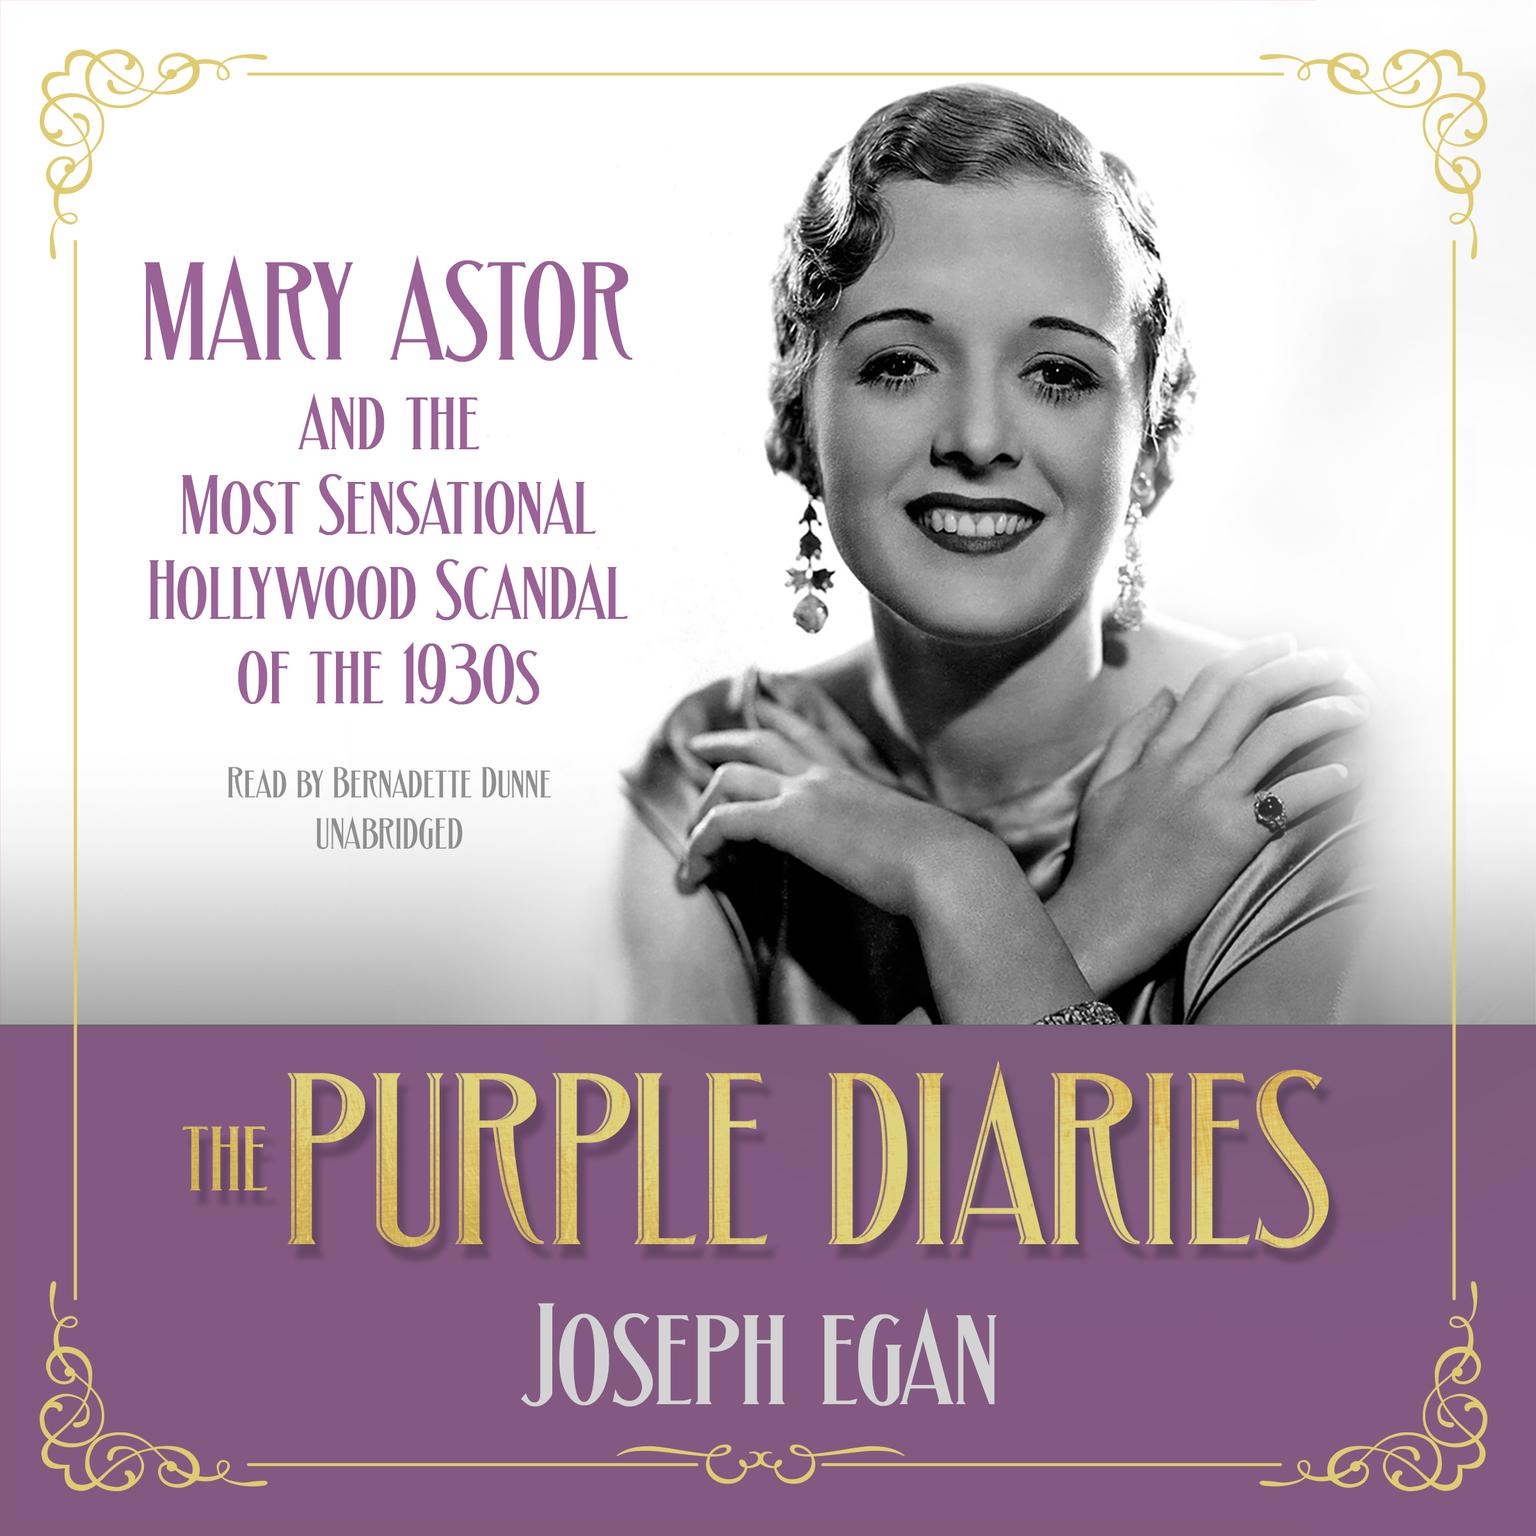 The Purple Diaries: Mary Astor and the Most Sensational Hollywood Scandal of the 1930s  Audiobook, by Joseph B. Egan